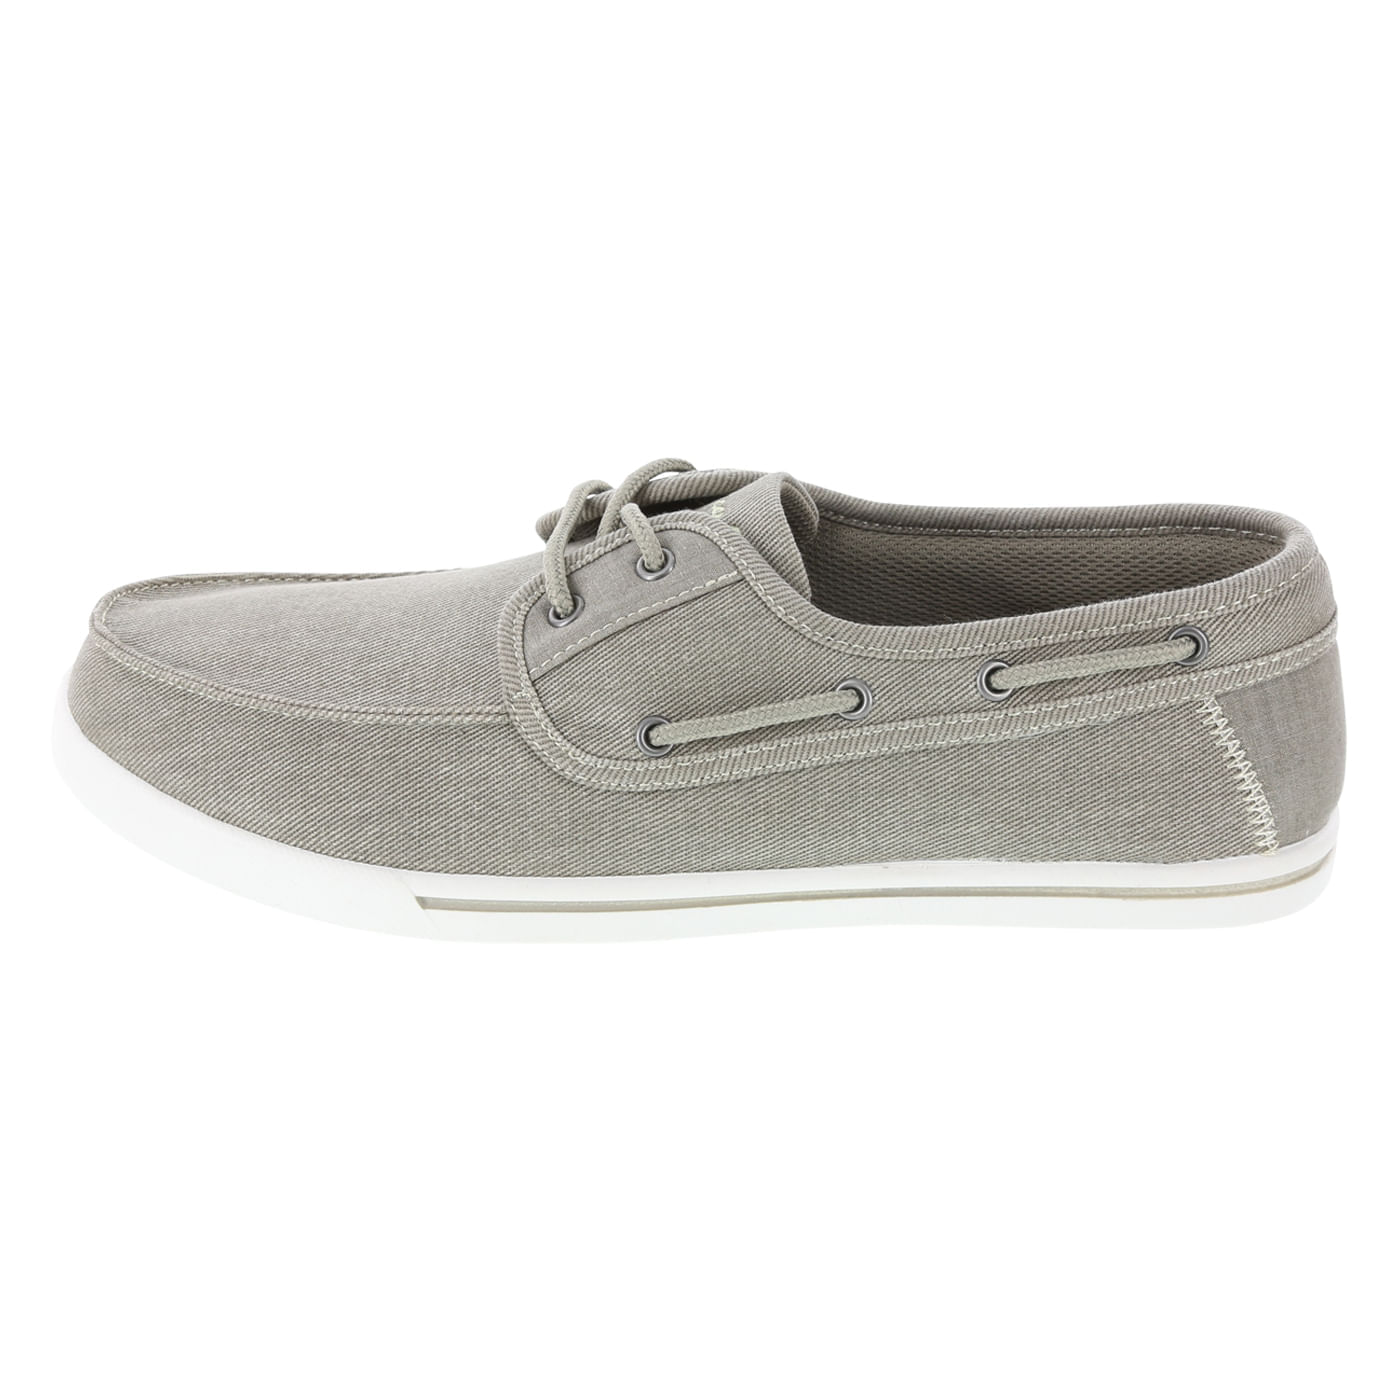 payless mens loafers